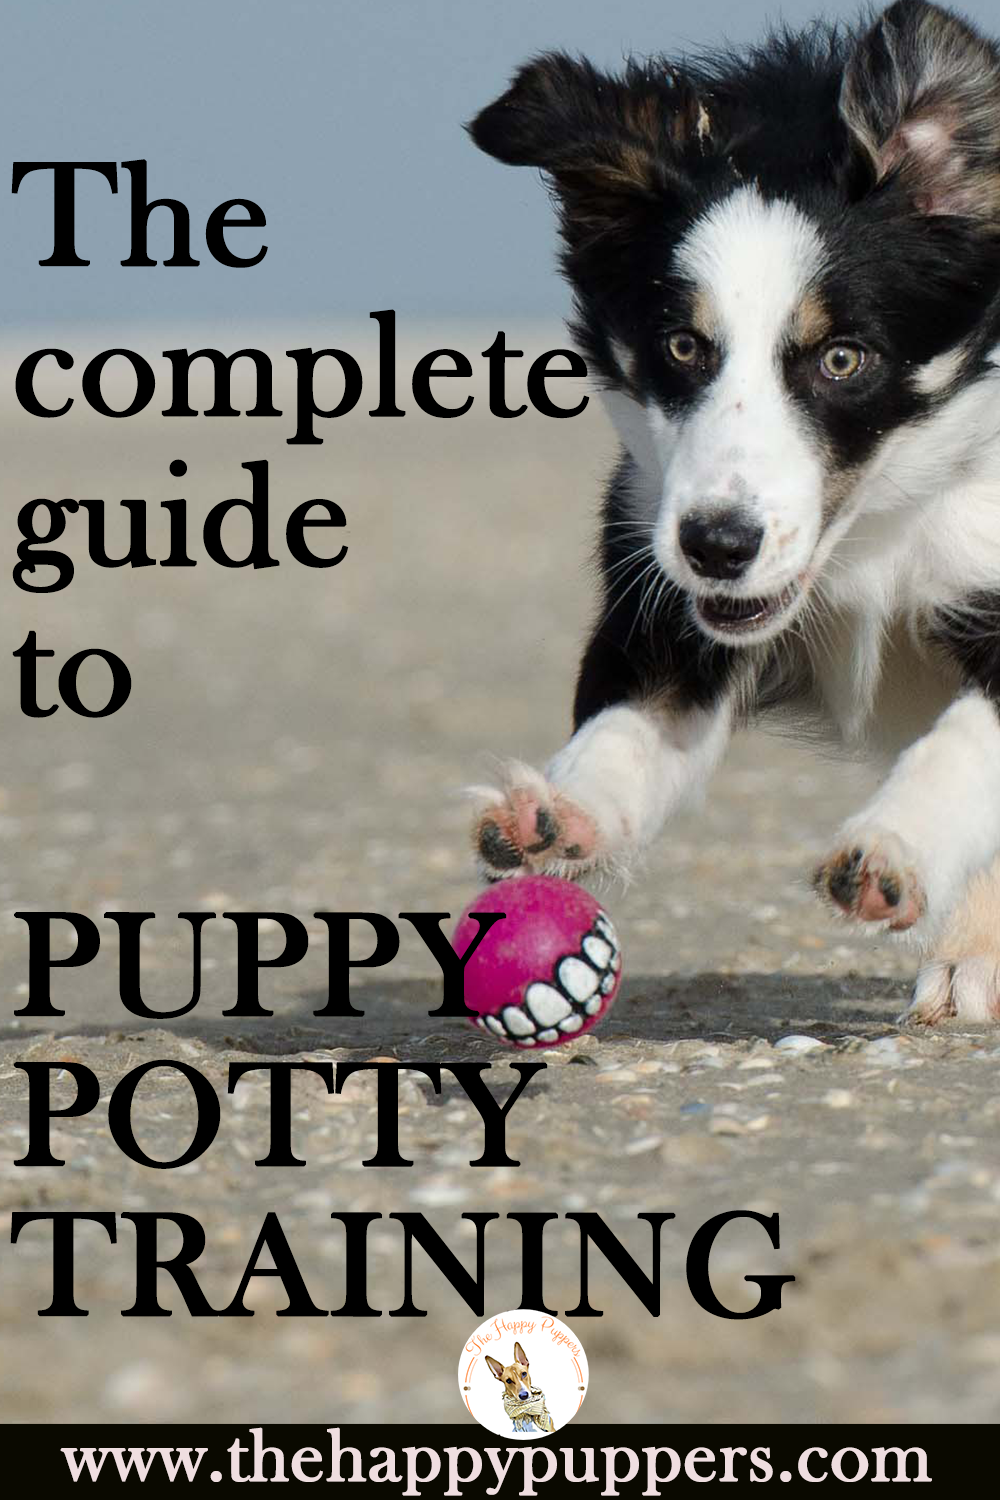 A complete guide to puppy potty training